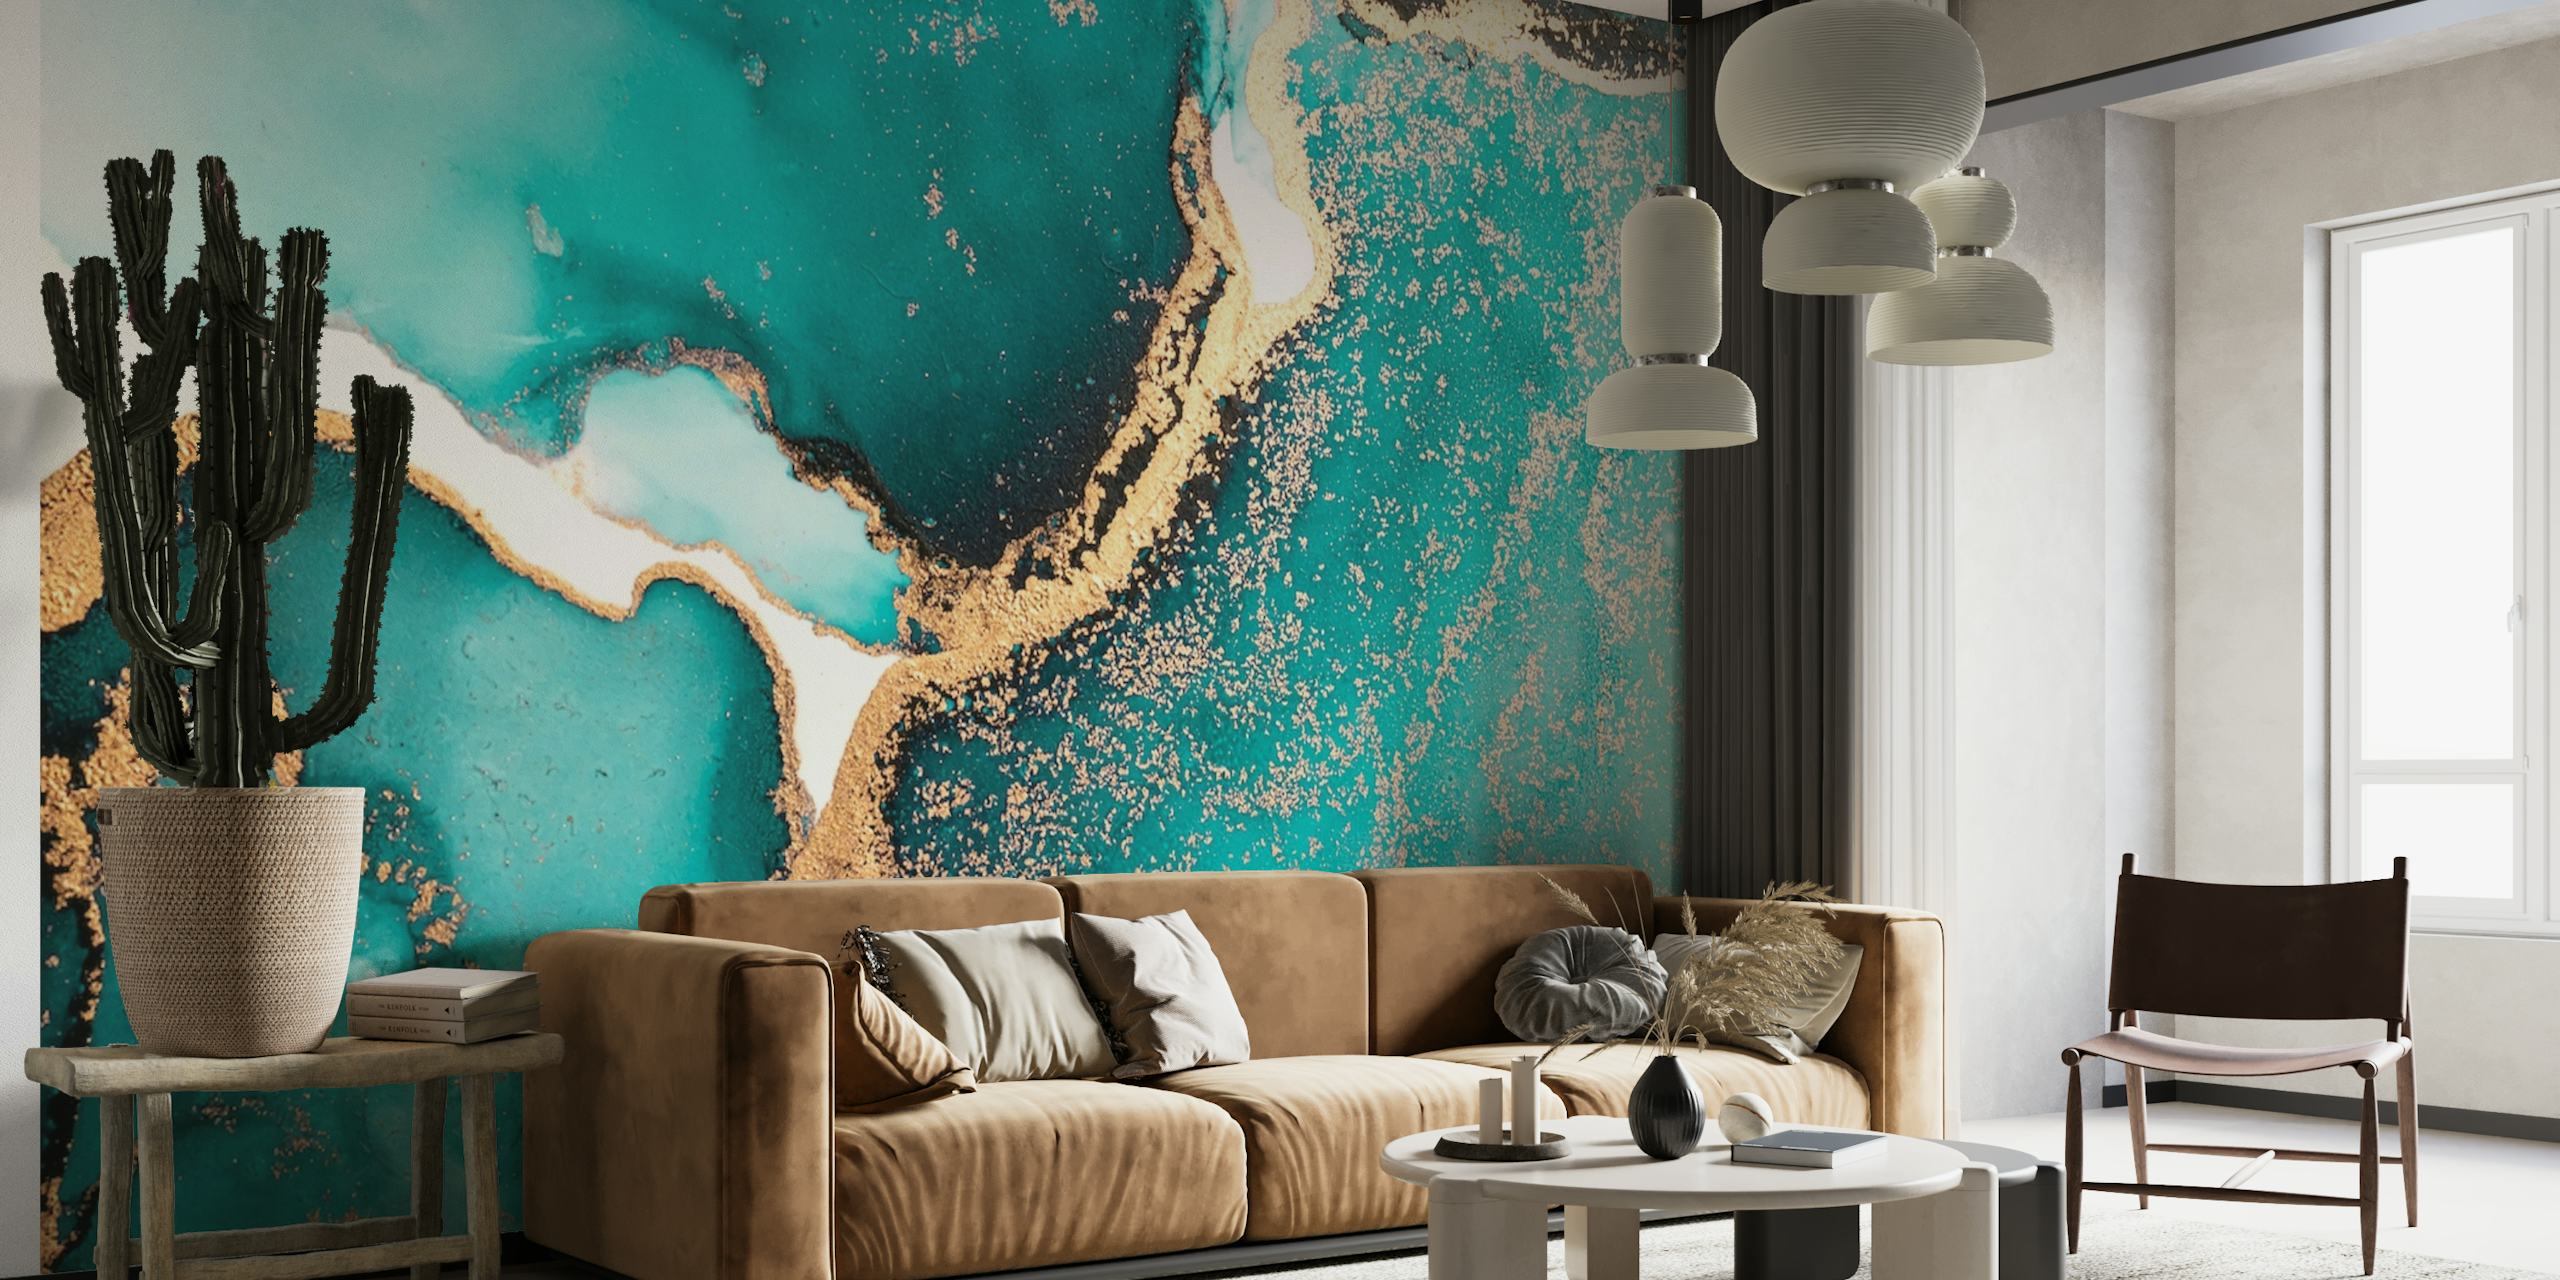 Alcohol Ink Turquoise Marble 3 wall mural with turquoise and gold swirls creating a serene atmosphere.